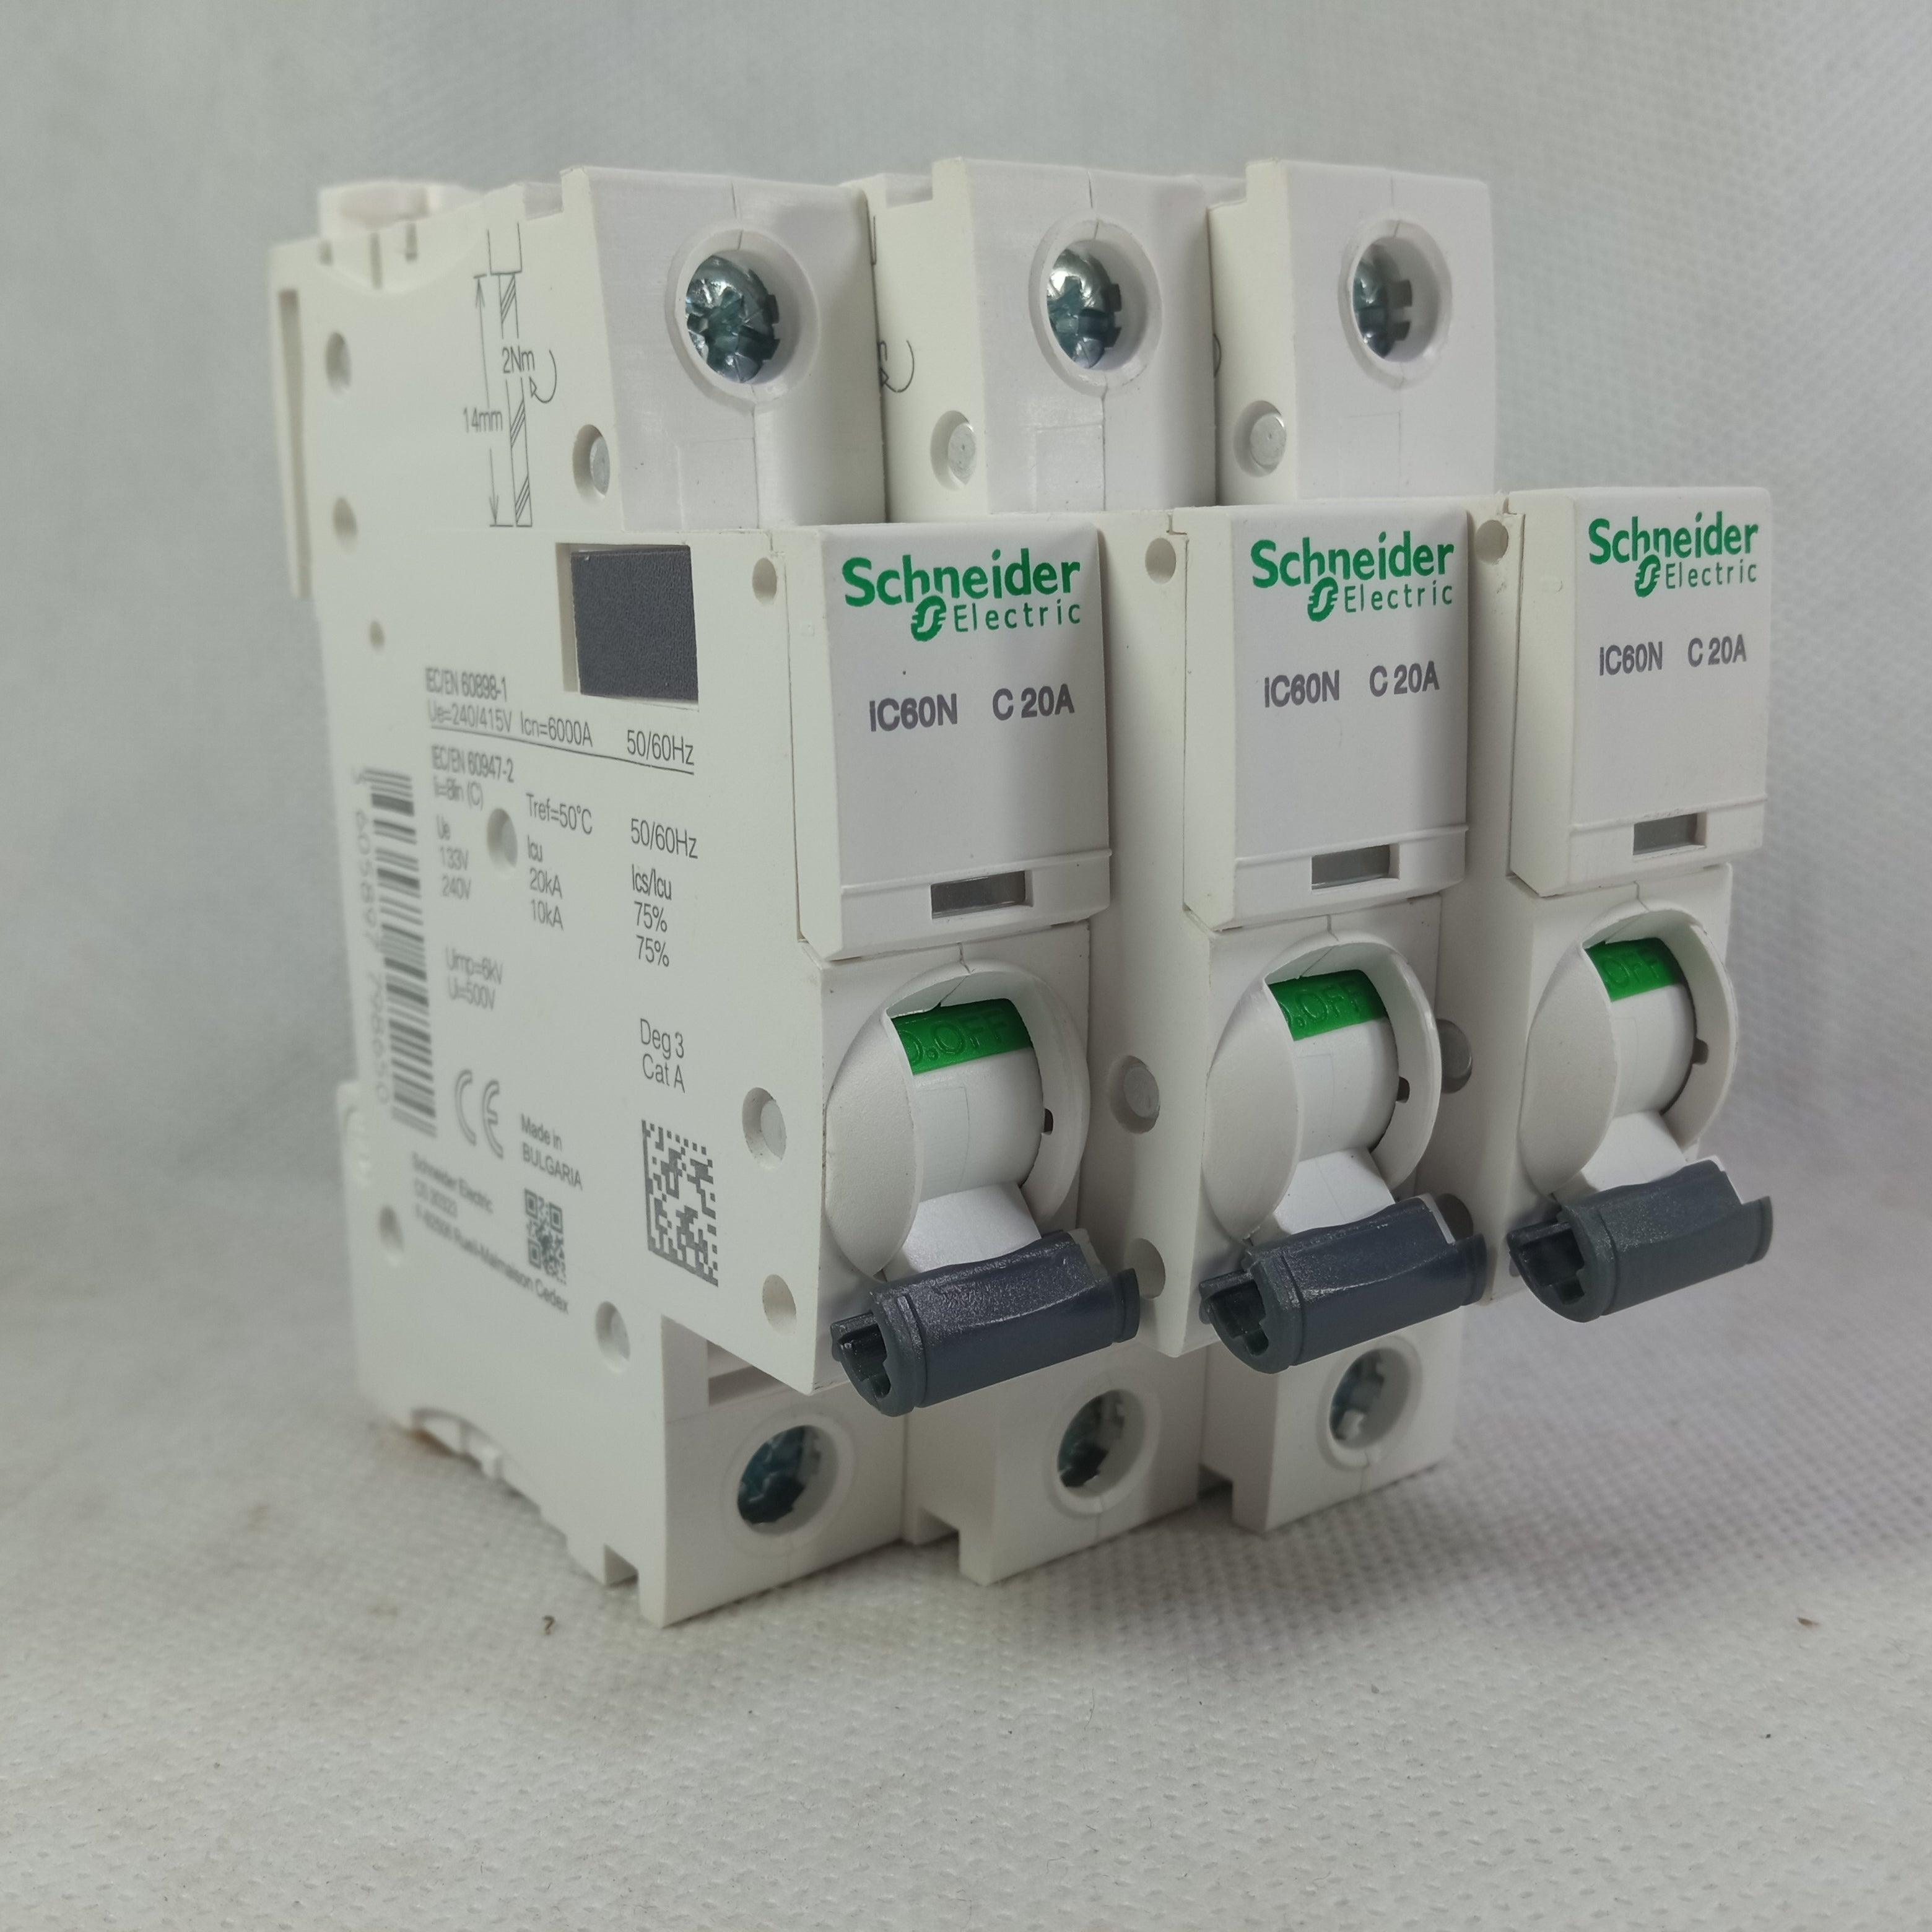 Schneider MCB AC Circuit Breakers China Made in Pakistan